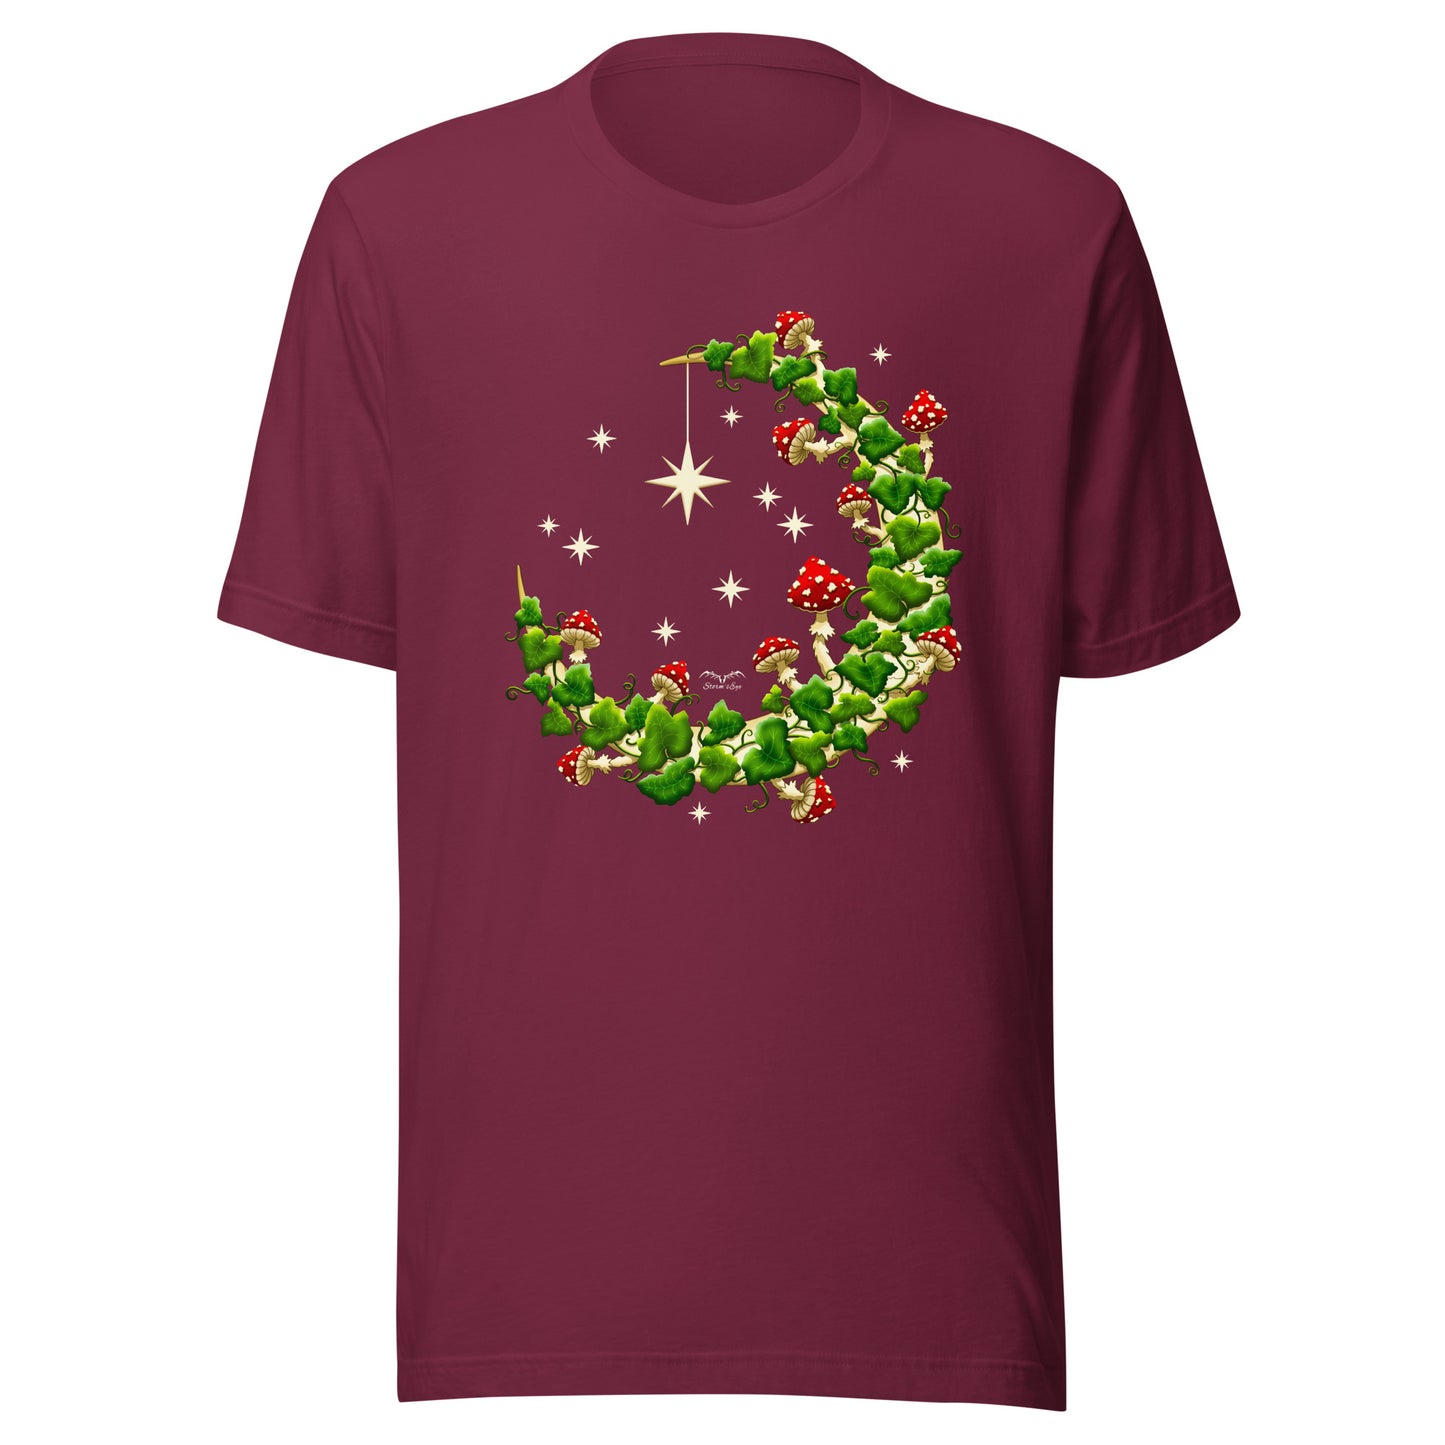 stormseye design mushroom moon witchy cottagecore T shirt, colour, flat view maroon red